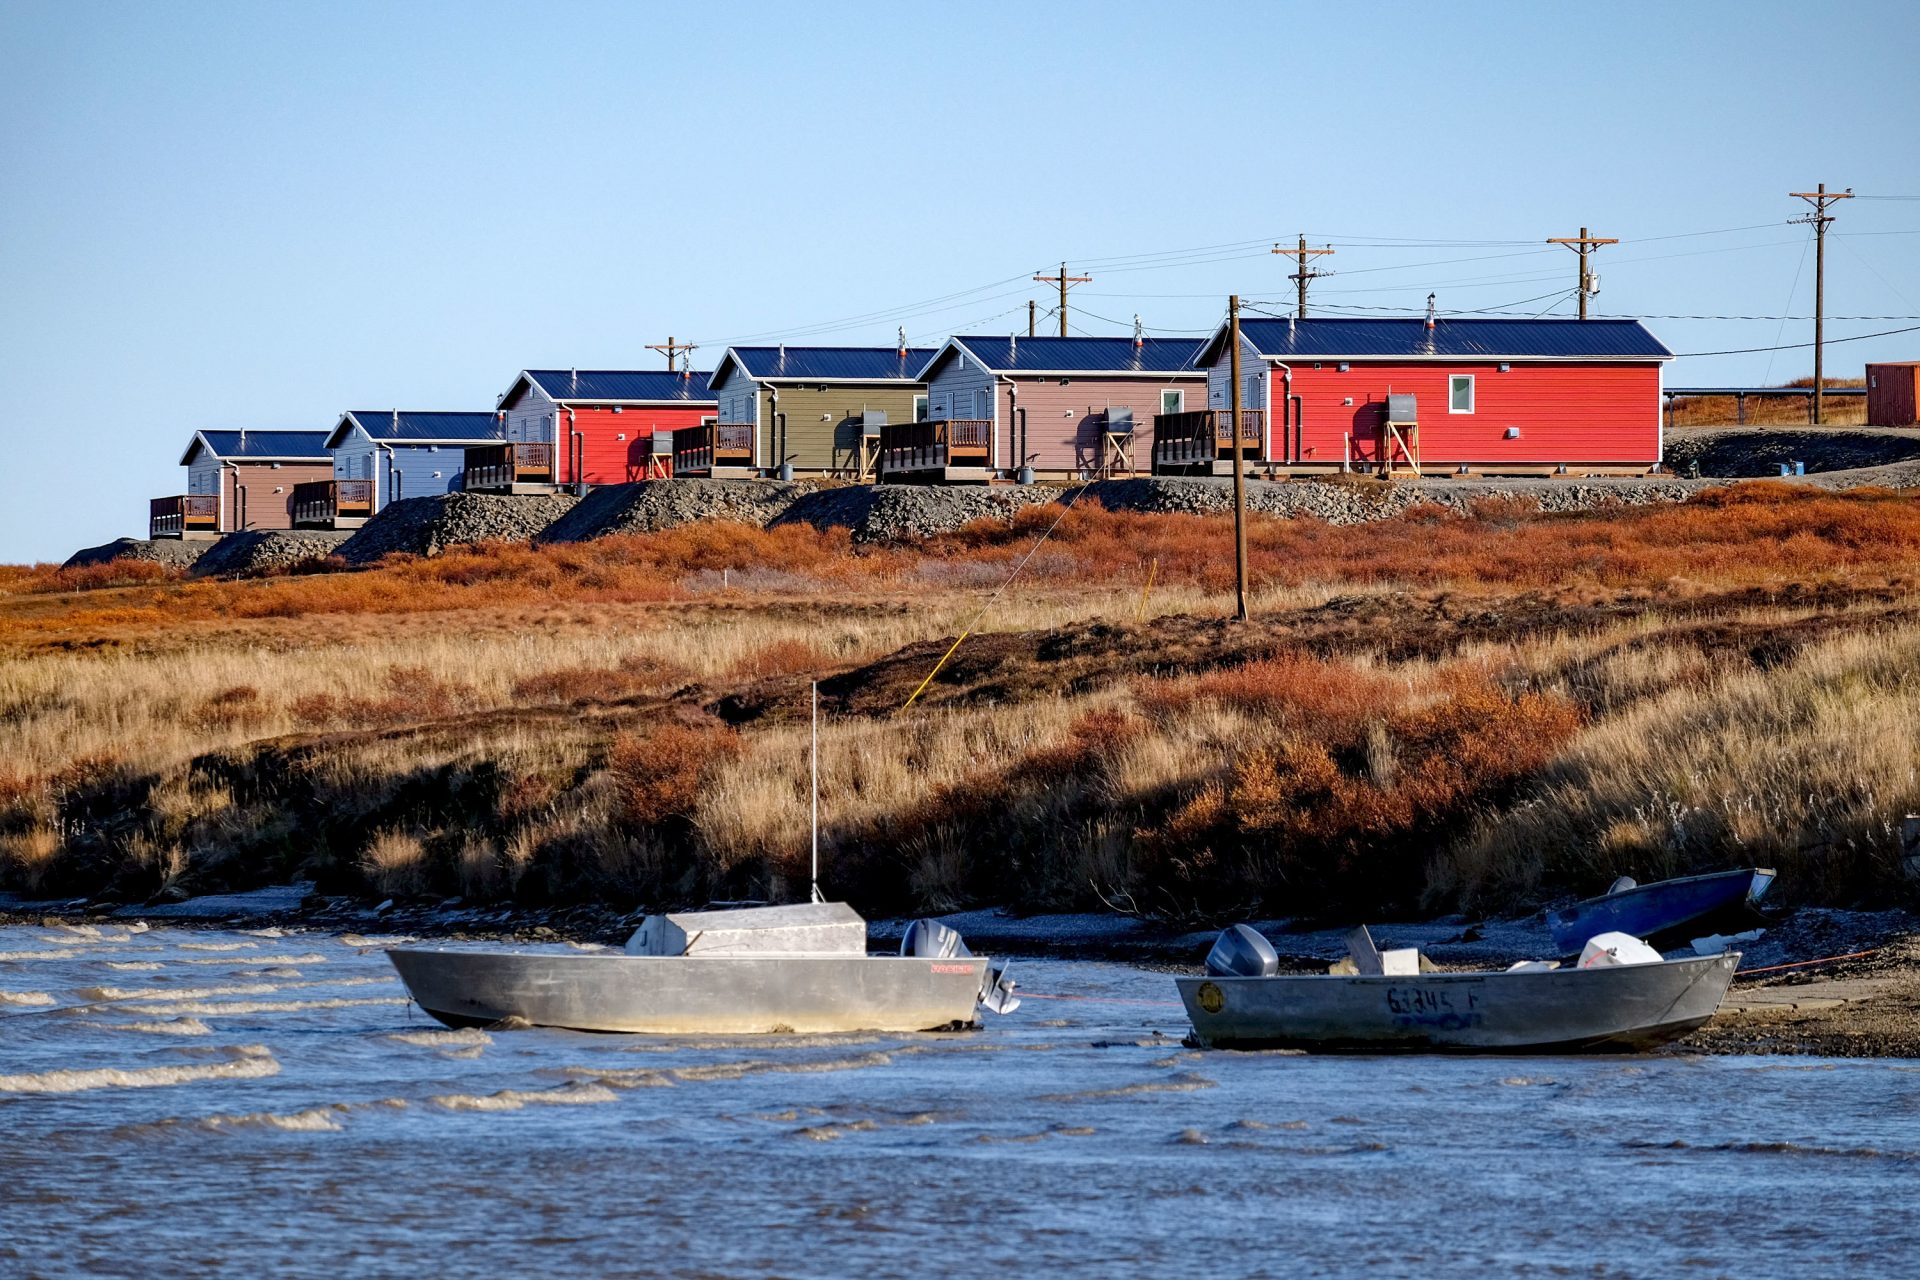 Some of Newtok's residents moved into 21 newly constructed homes in Mertarvik, Alaska, in October 2019.